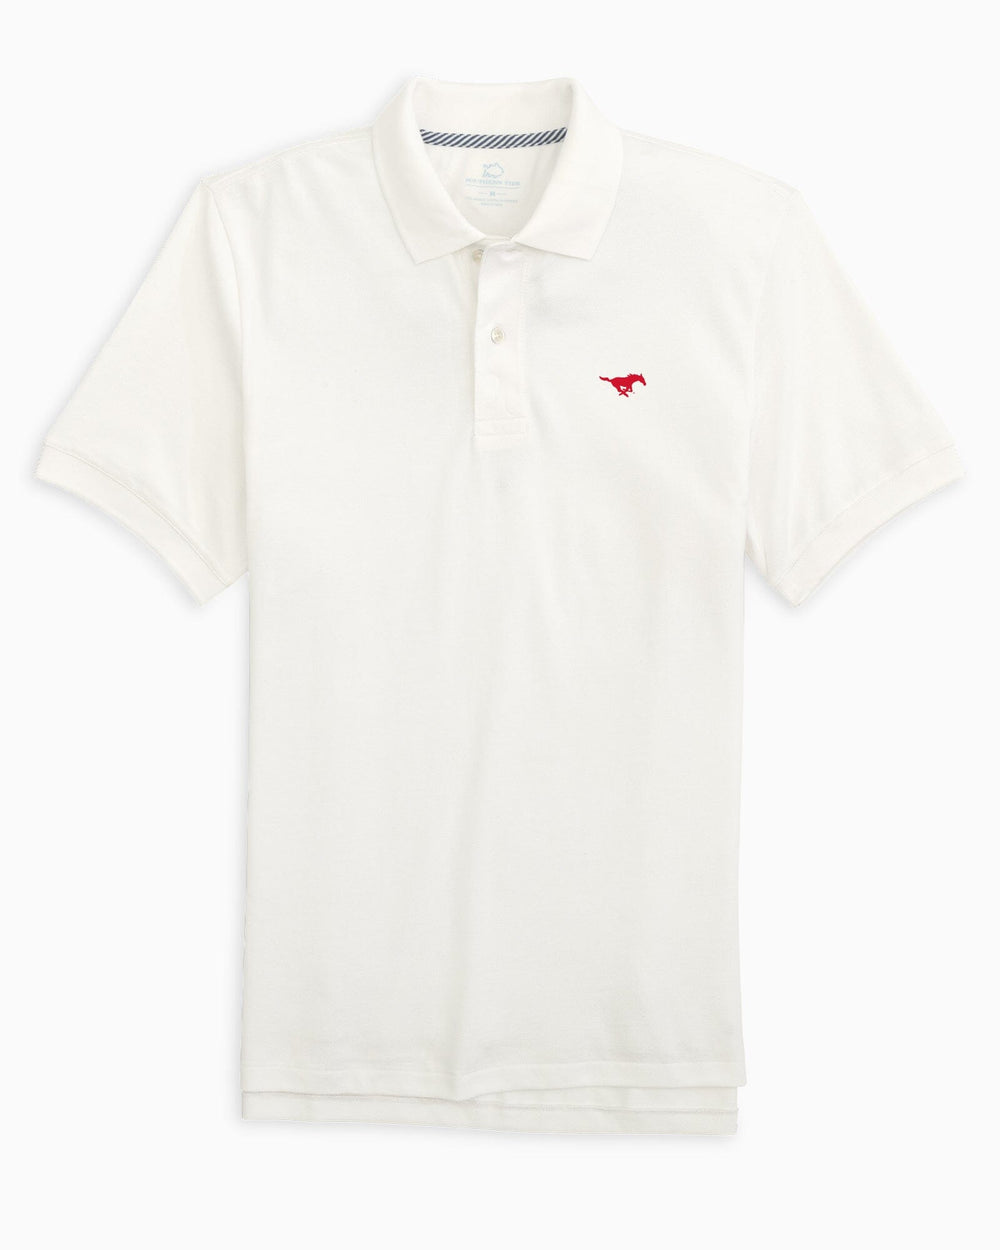 The front view of the SMU Mustangs Skipjack Polo by Southern Tide - Classic White